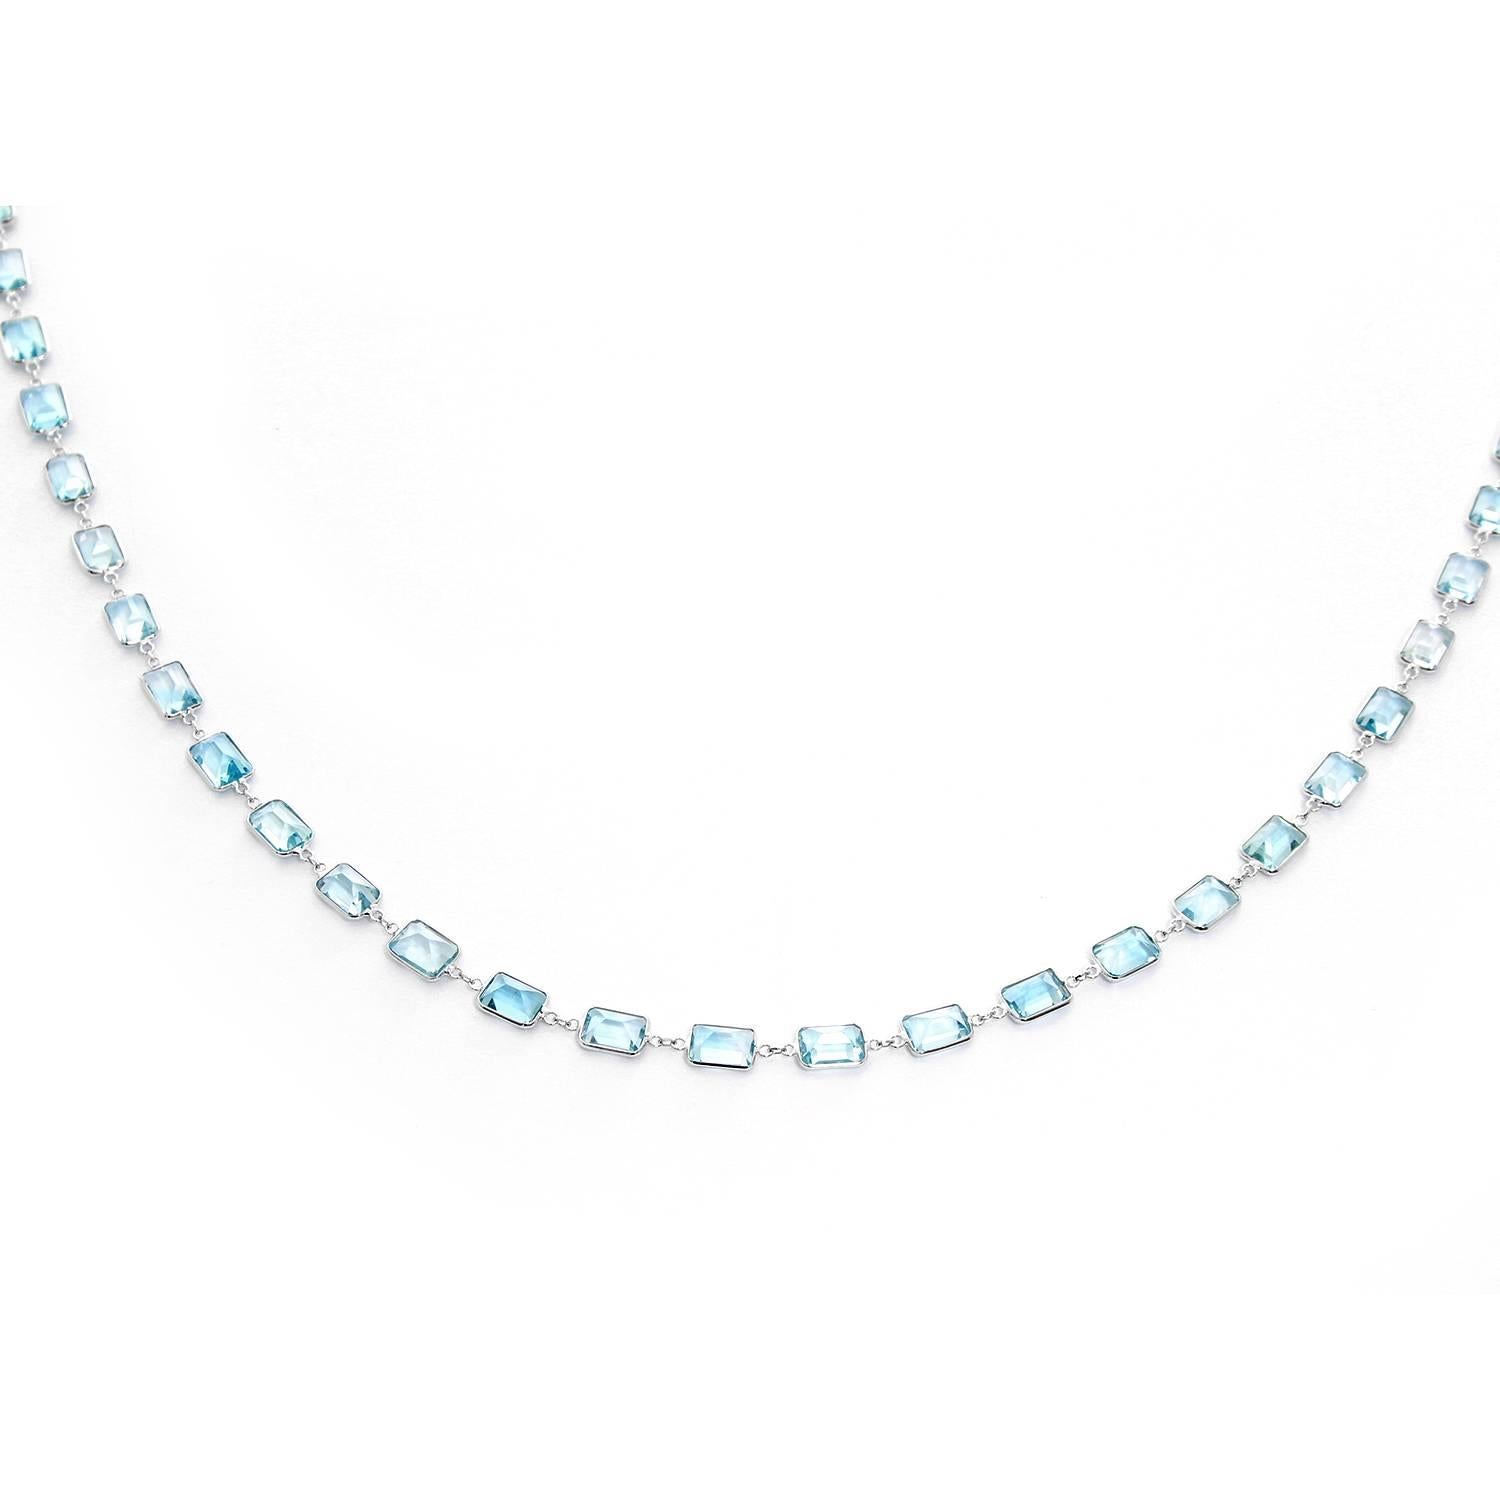 Classic 14K White Gold Blue Topaz by the Yard Necklace - . Beautiful 14K White Gold with Rectangle Blue Topaz stones. Length 40 inches. Total weight 25.5 grams. Perfect to wear as a single strand or to double it around your neck!